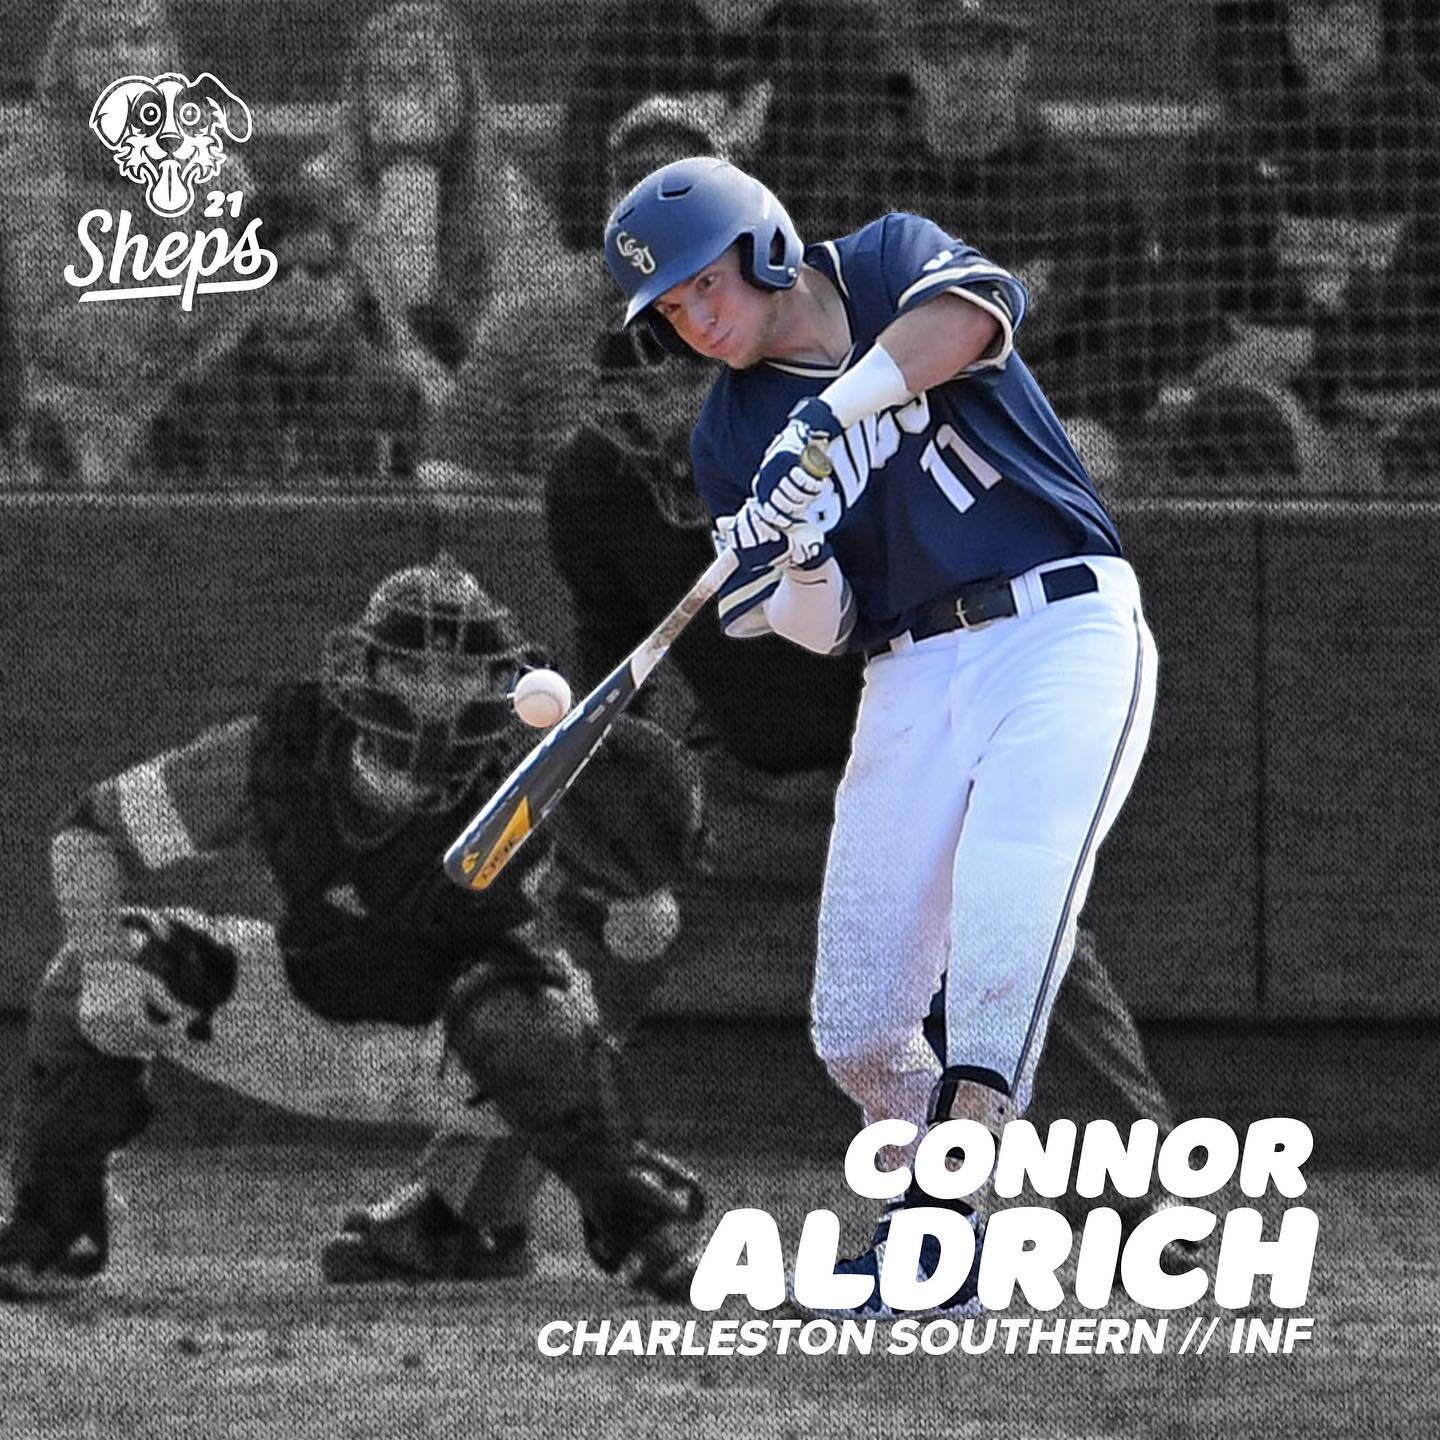 The first of two from the @csubucs, Connor Aldrich (@c_aldrich7) joins the Shepherds this summer after coming off of a great weekend against UNC Asheville.